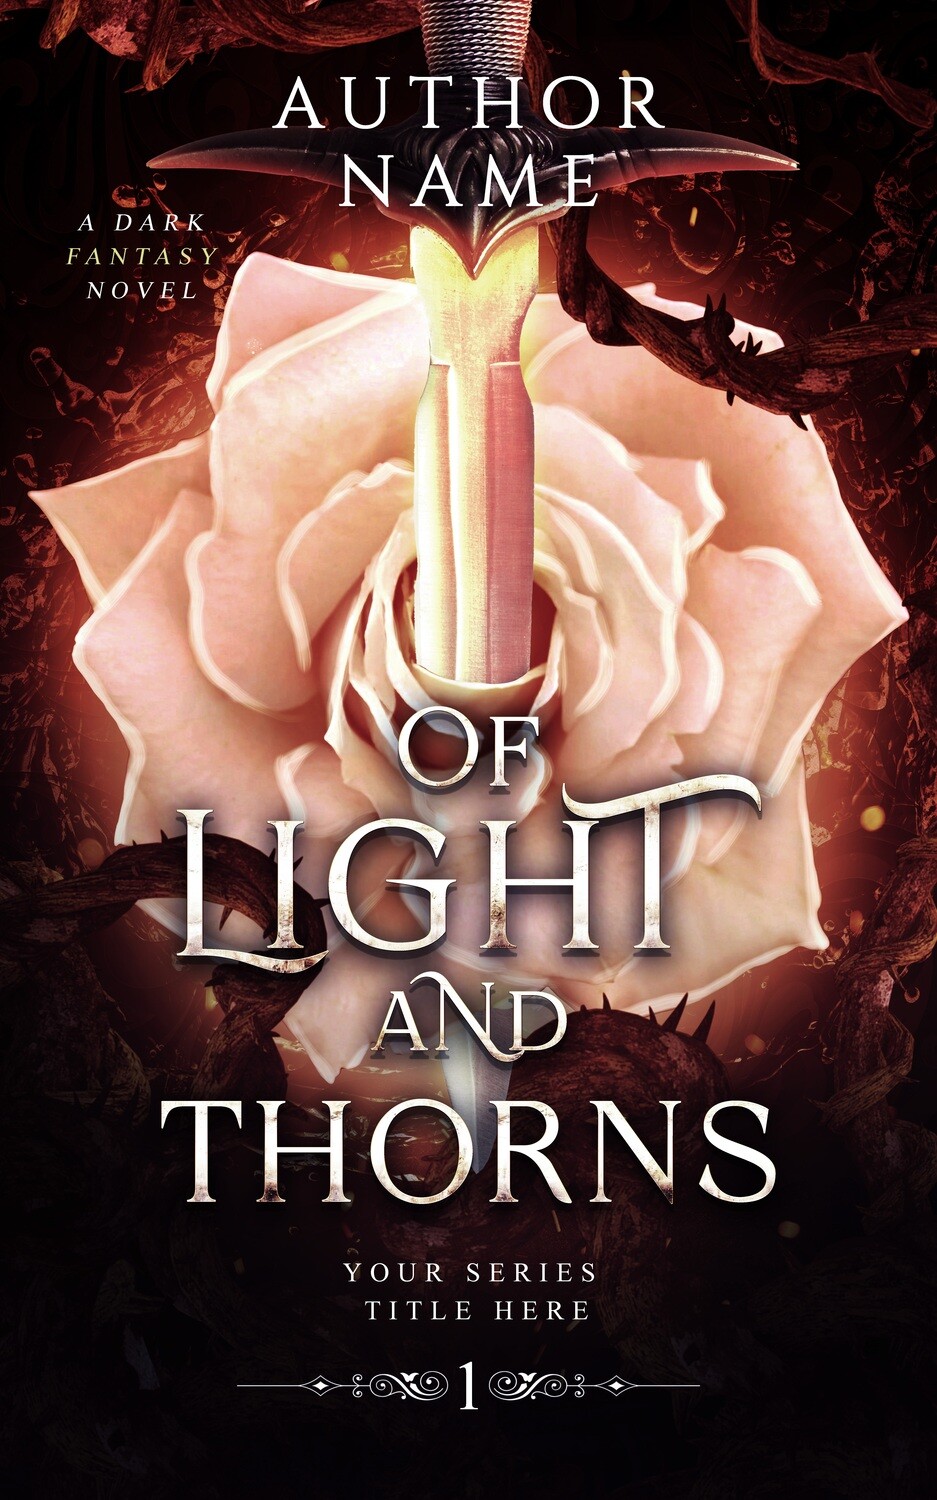 Ebook: Of Light and Thorns TRILOGY